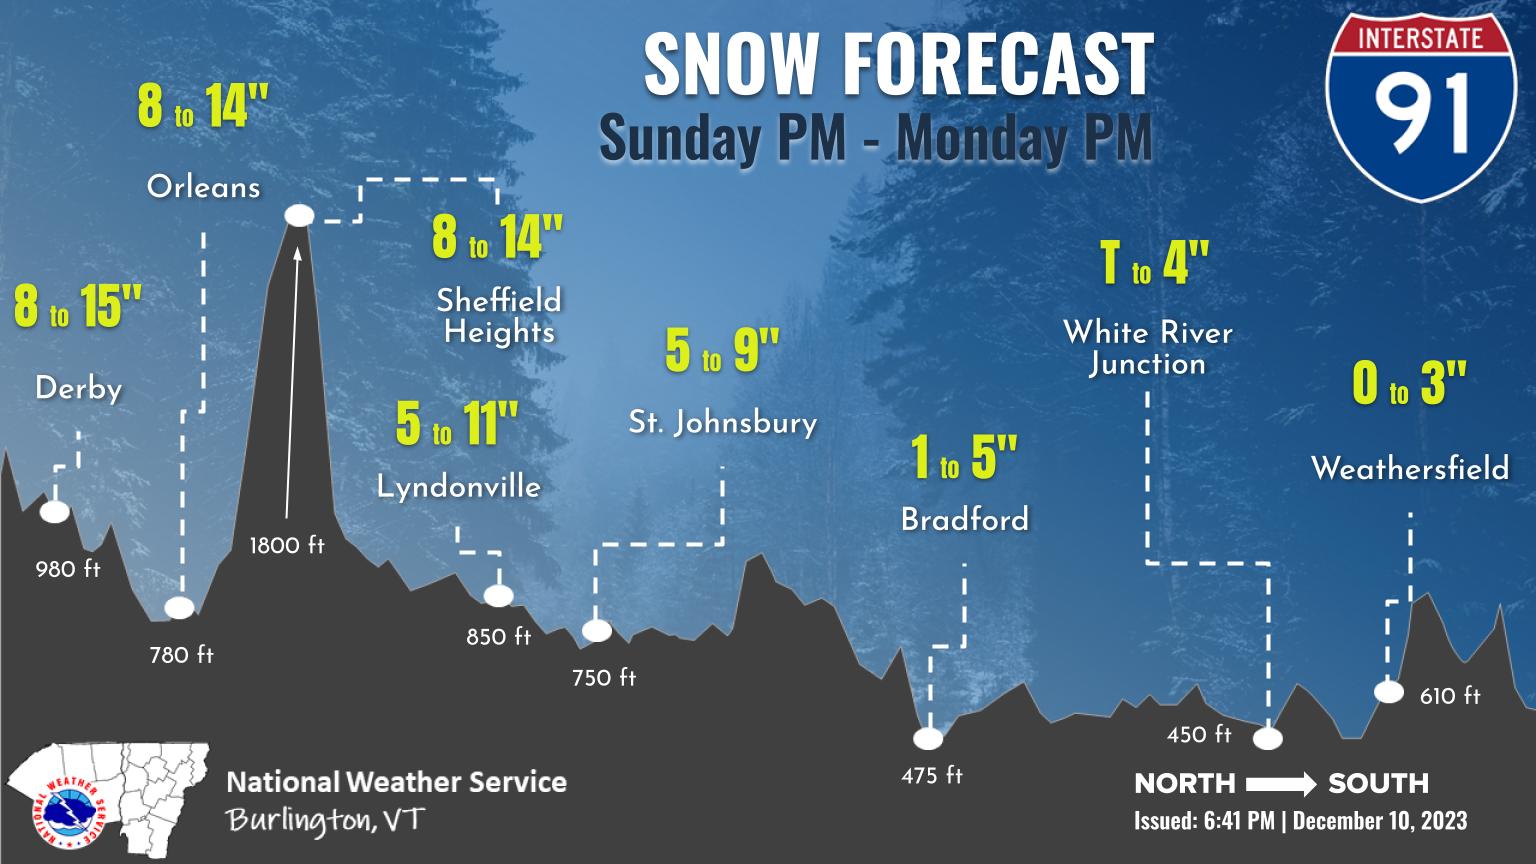 Vermont Highway Forecasts for Tonight & Tomorrow | Highways 4, 87, 89, 91 – SnowBrains